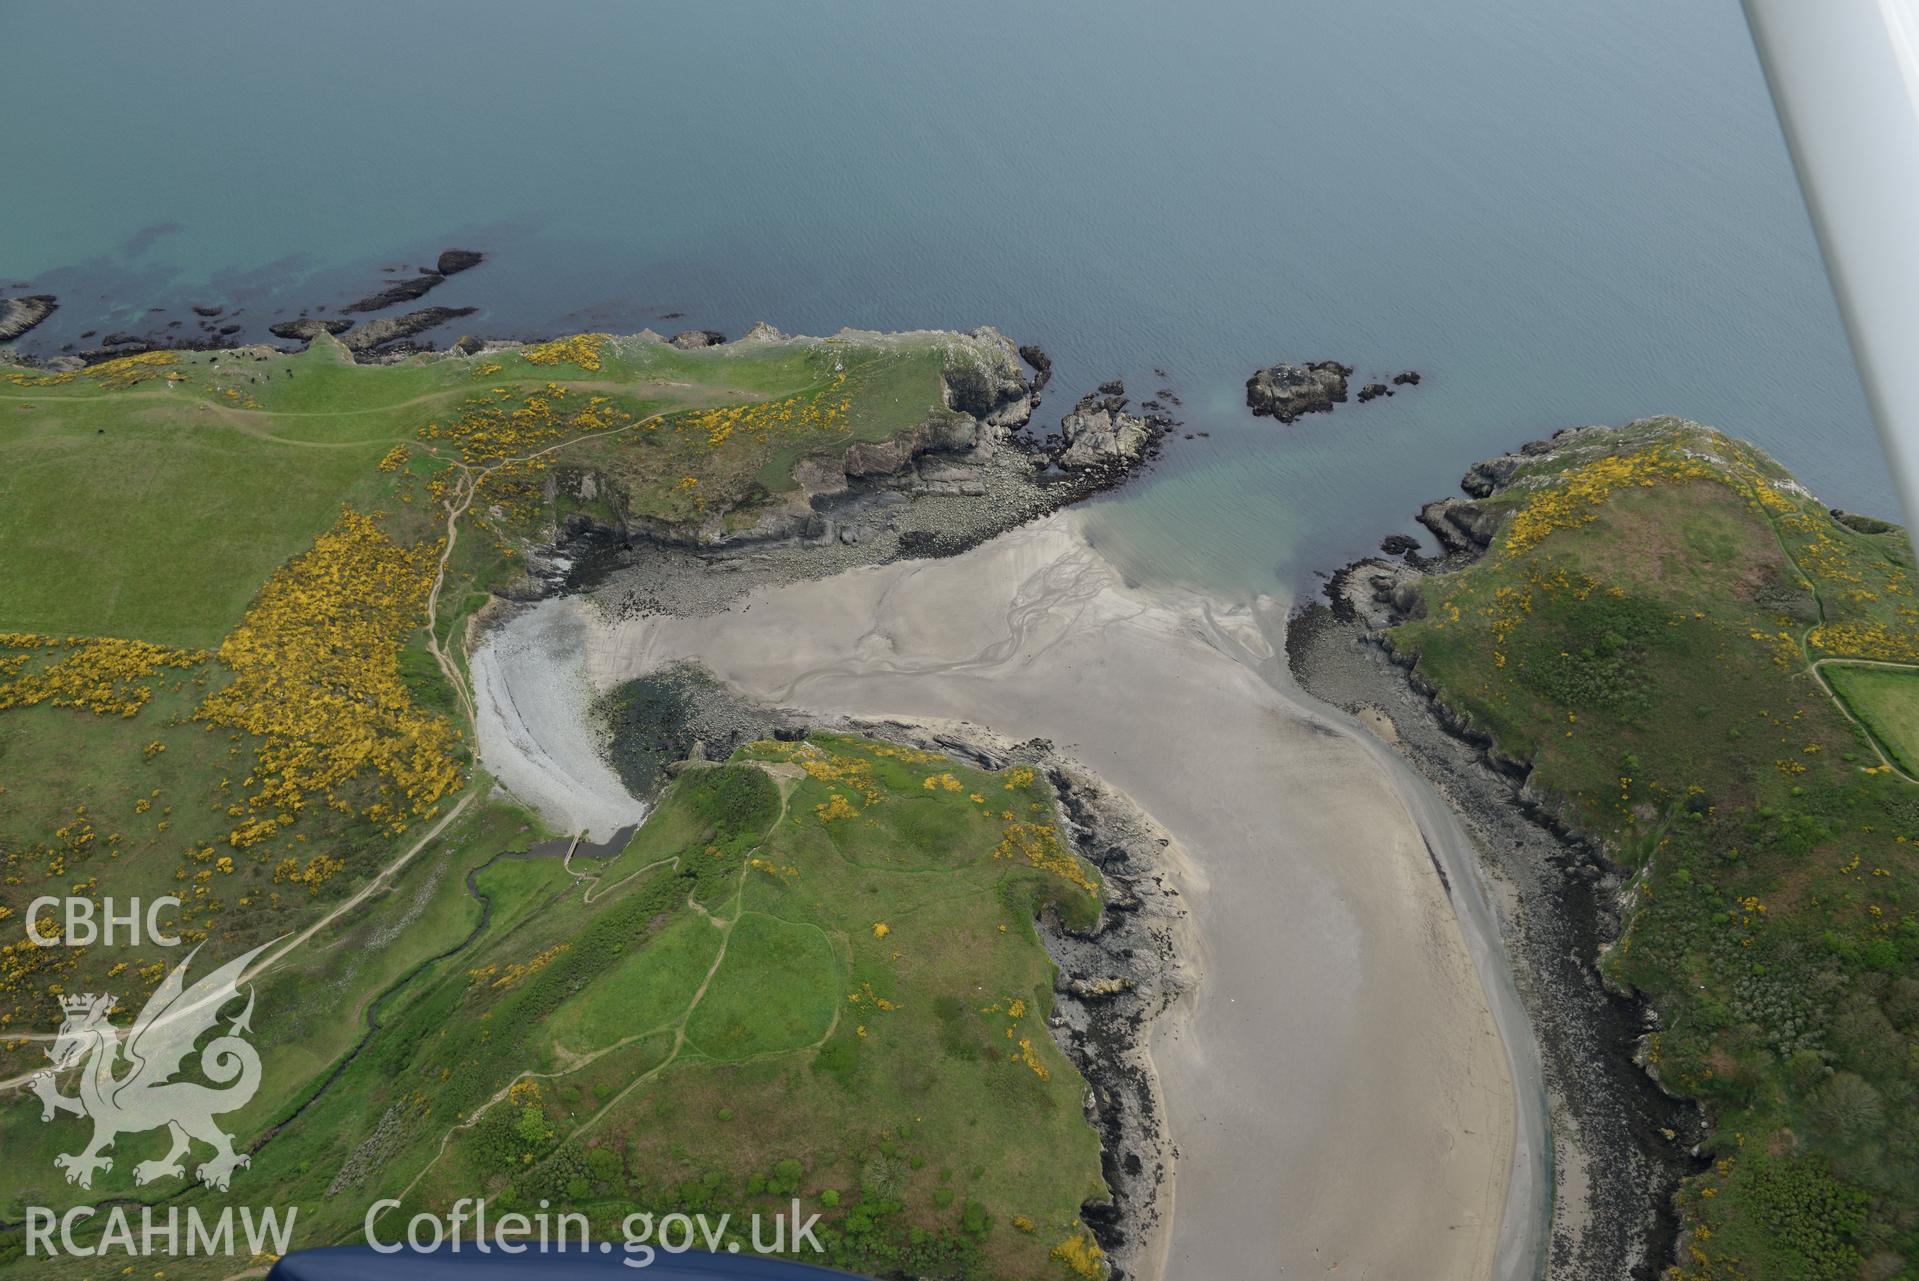 Gribin promontory fort. Baseline aerial reconnaissance survey for the CHERISH Project. ? Crown: CHERISH PROJECT 2017. Produced with EU funds through the Ireland Wales Co-operation Programme 2014-2020. All material made freely available through the Open Government Licence.